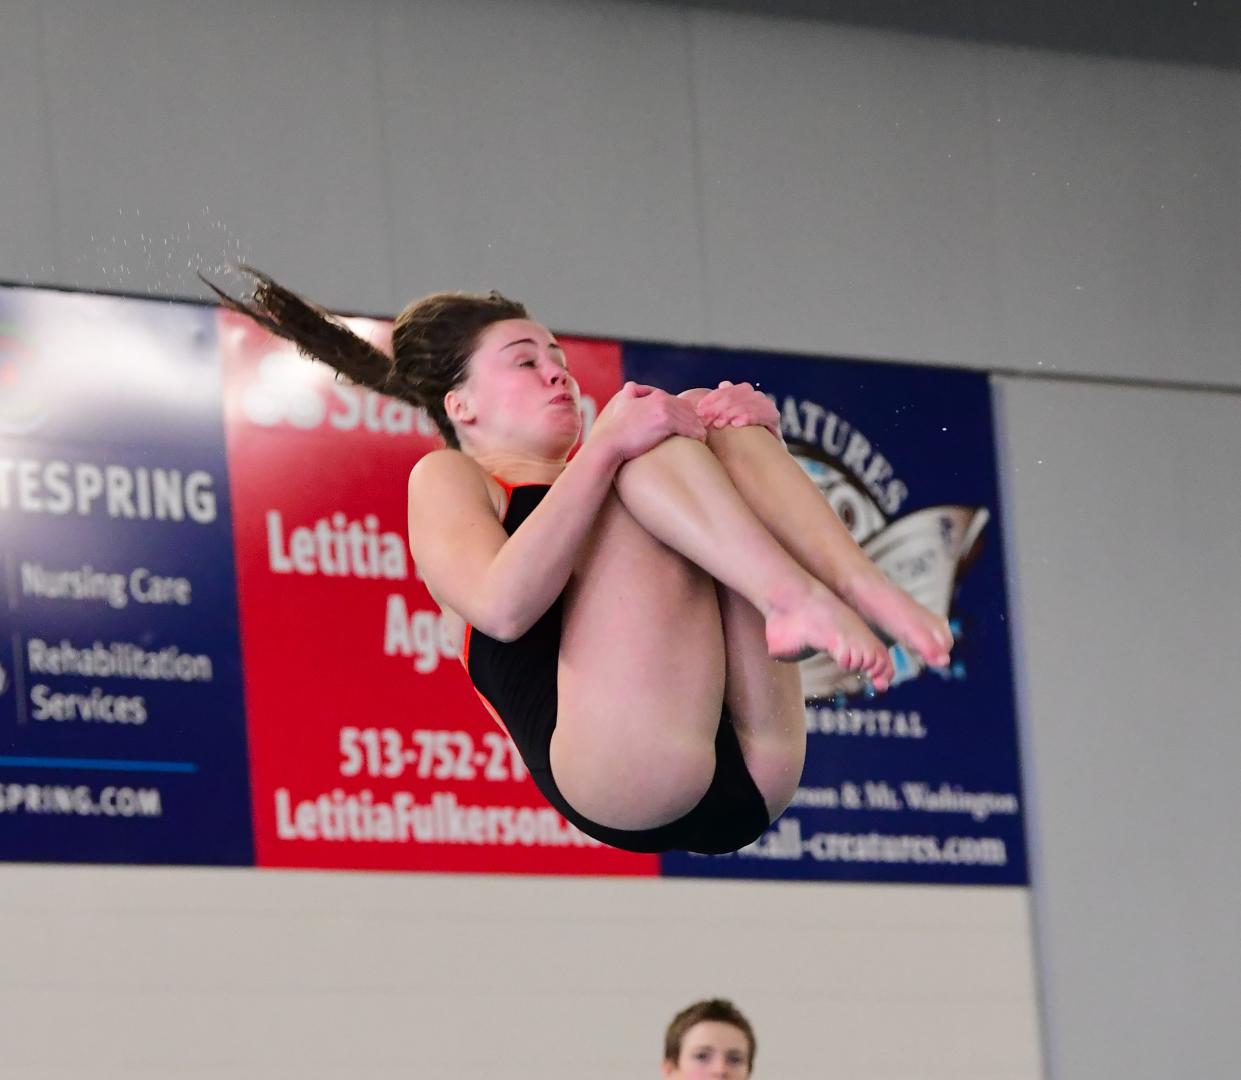 Natalie Reising of Anderson holds a tight tuck while diving in the ladies diving finals at the Southwest Ohio High School Swimming and Diving Classic at the West Clermont Natatorium, Jan. 15, 2023.